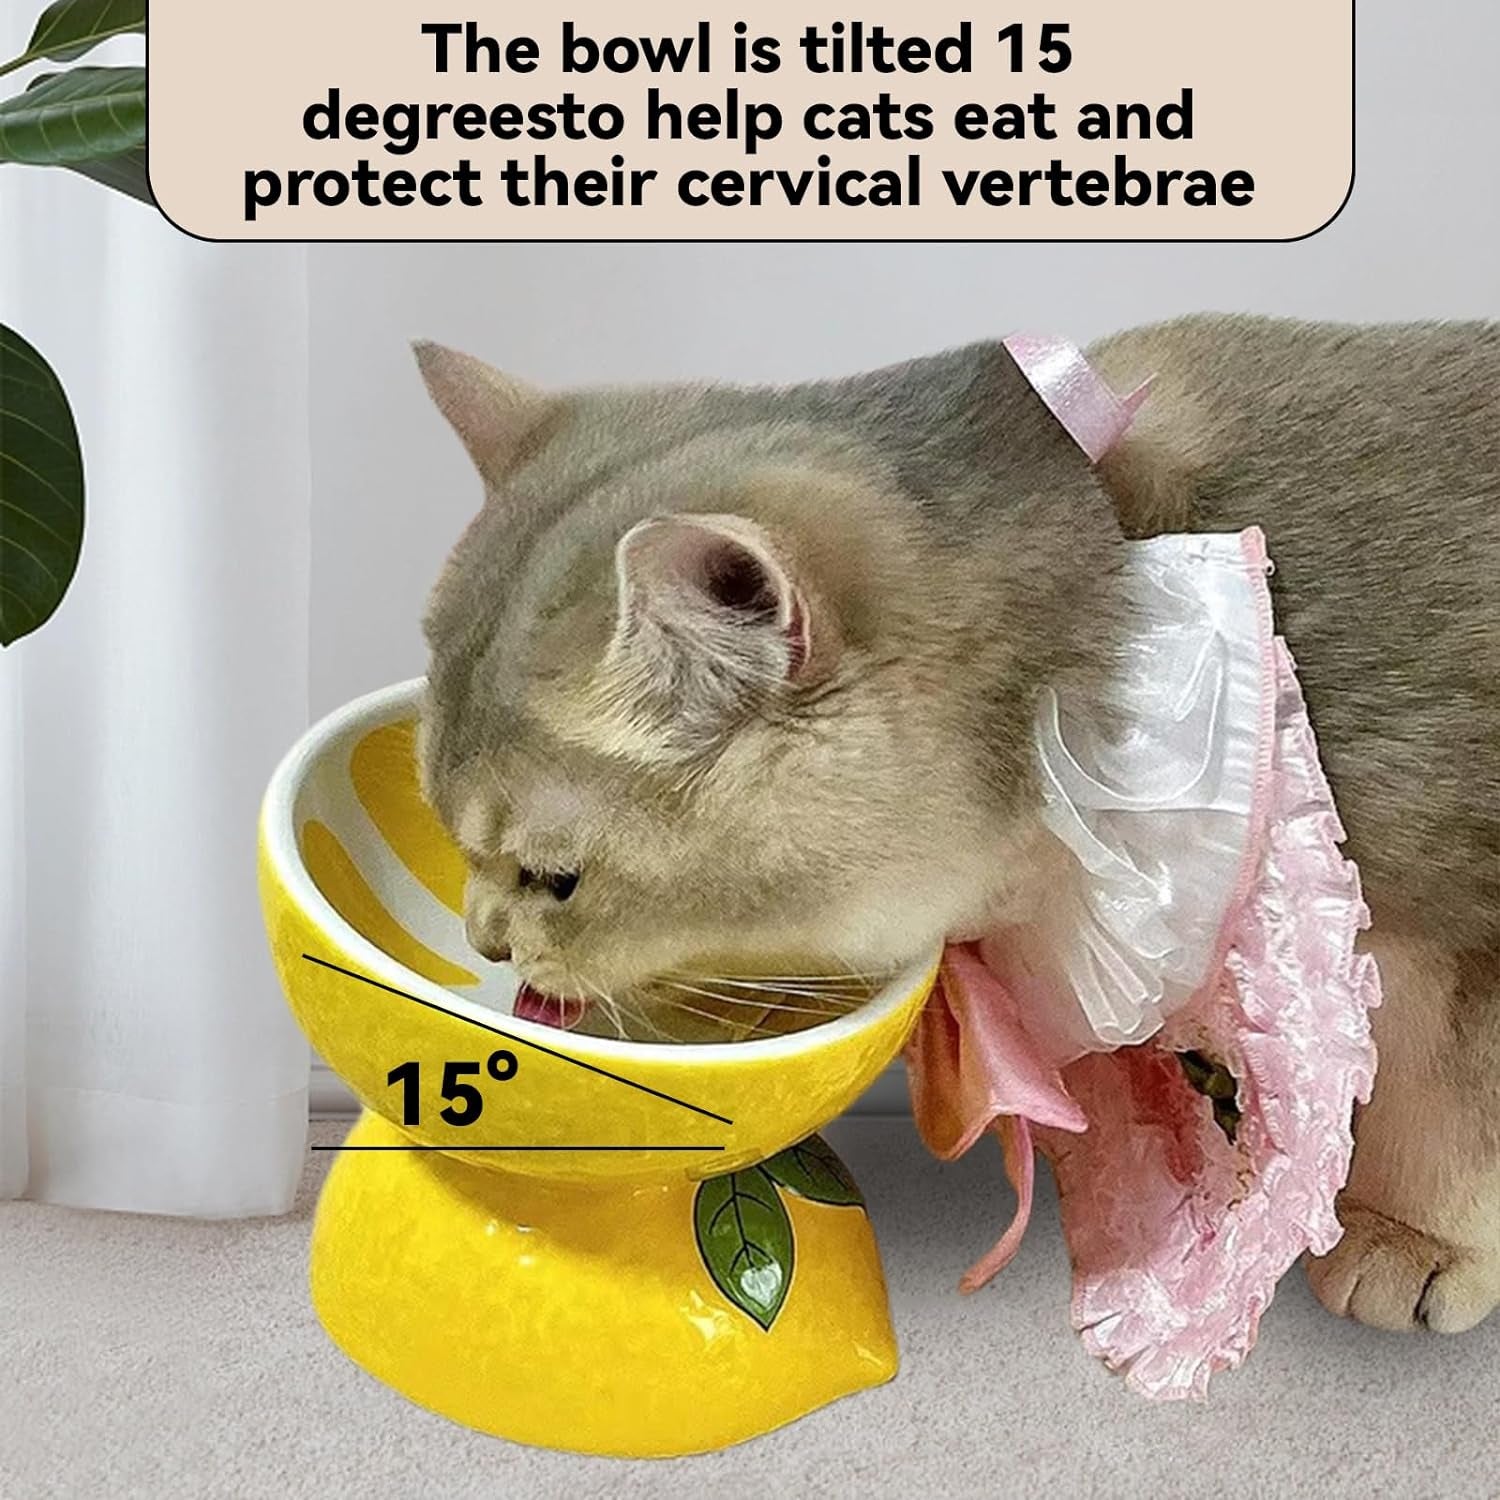 Elevated Ceramic Cat Bowls - Anti-Fatigue, Tilted Design for Stress-Free Feeding, Set of 2 Watermelon & Lemon Bowls, Ideal for Indoor Cats